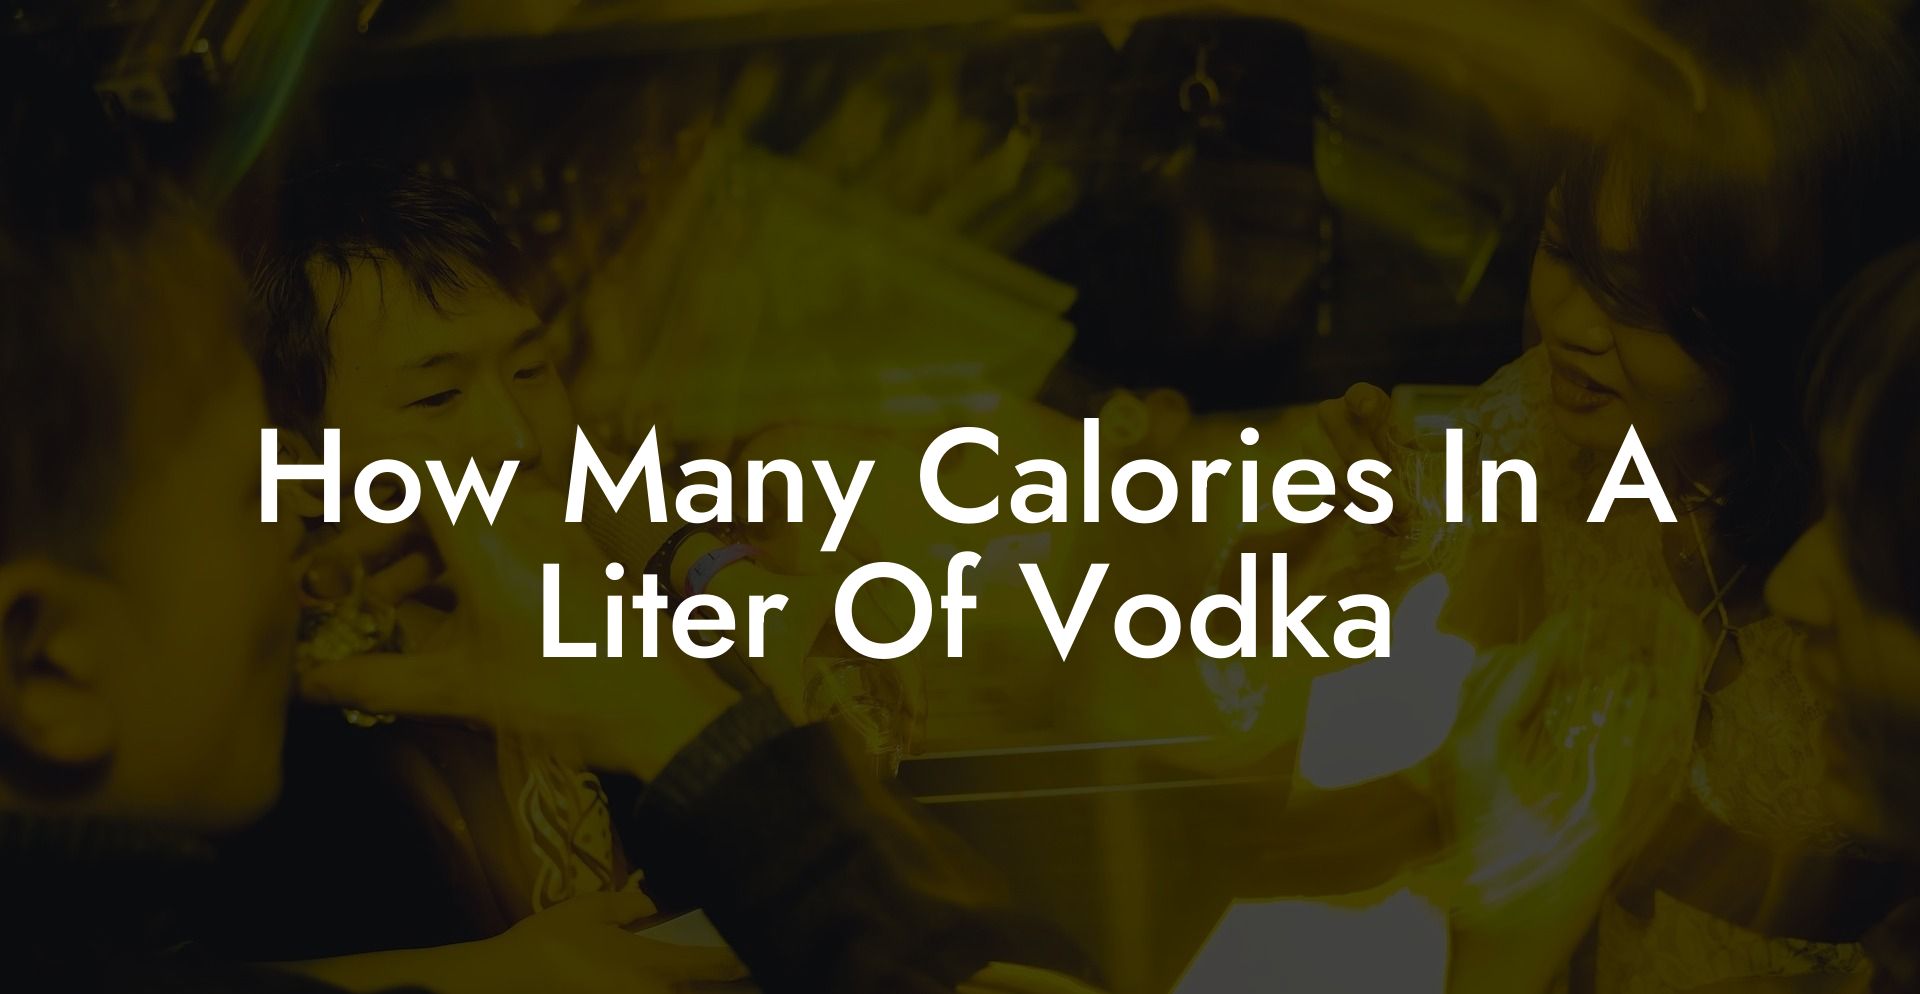 How Many Calories In A Liter Of Vodka